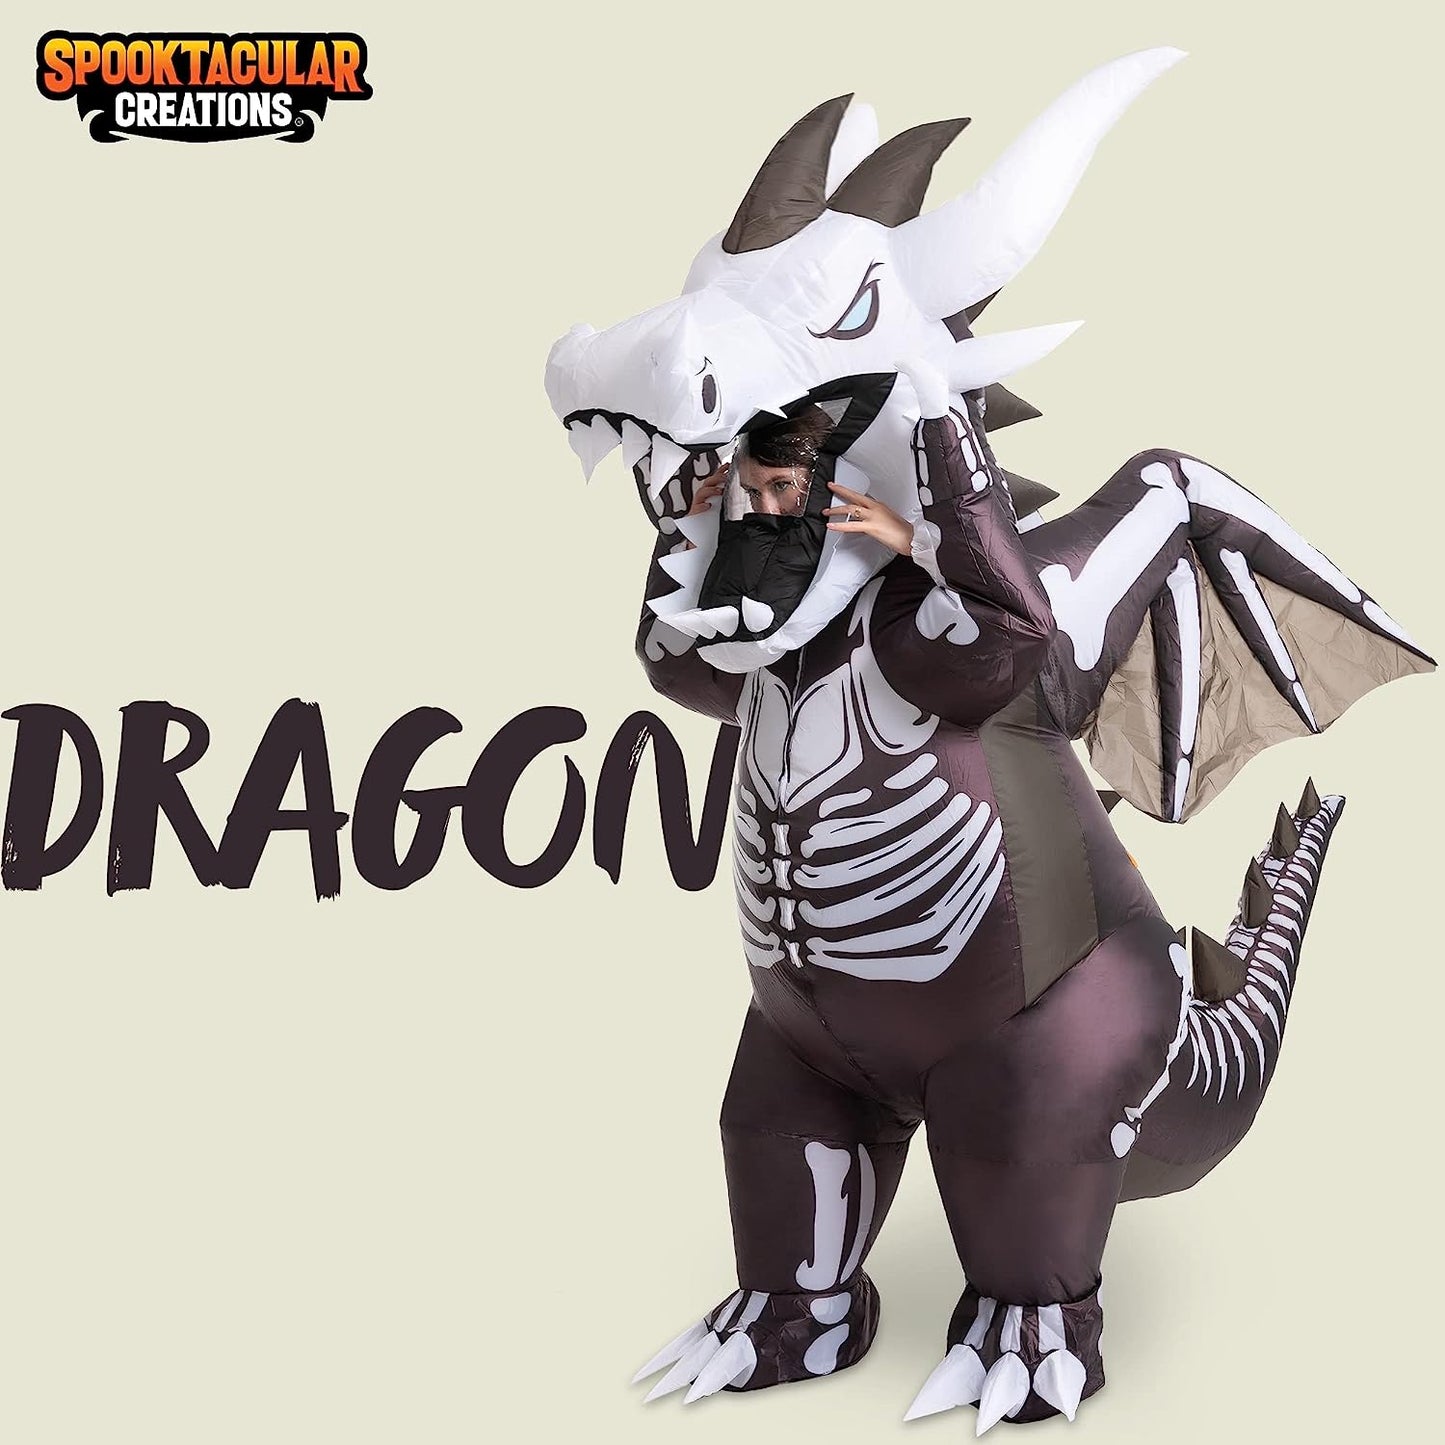 Inflatable Costume for Adult, Dragon Skeleton Air Blow Up Costume, Full Body Costume with 3D Horns Wings for Halloween Costume Parties